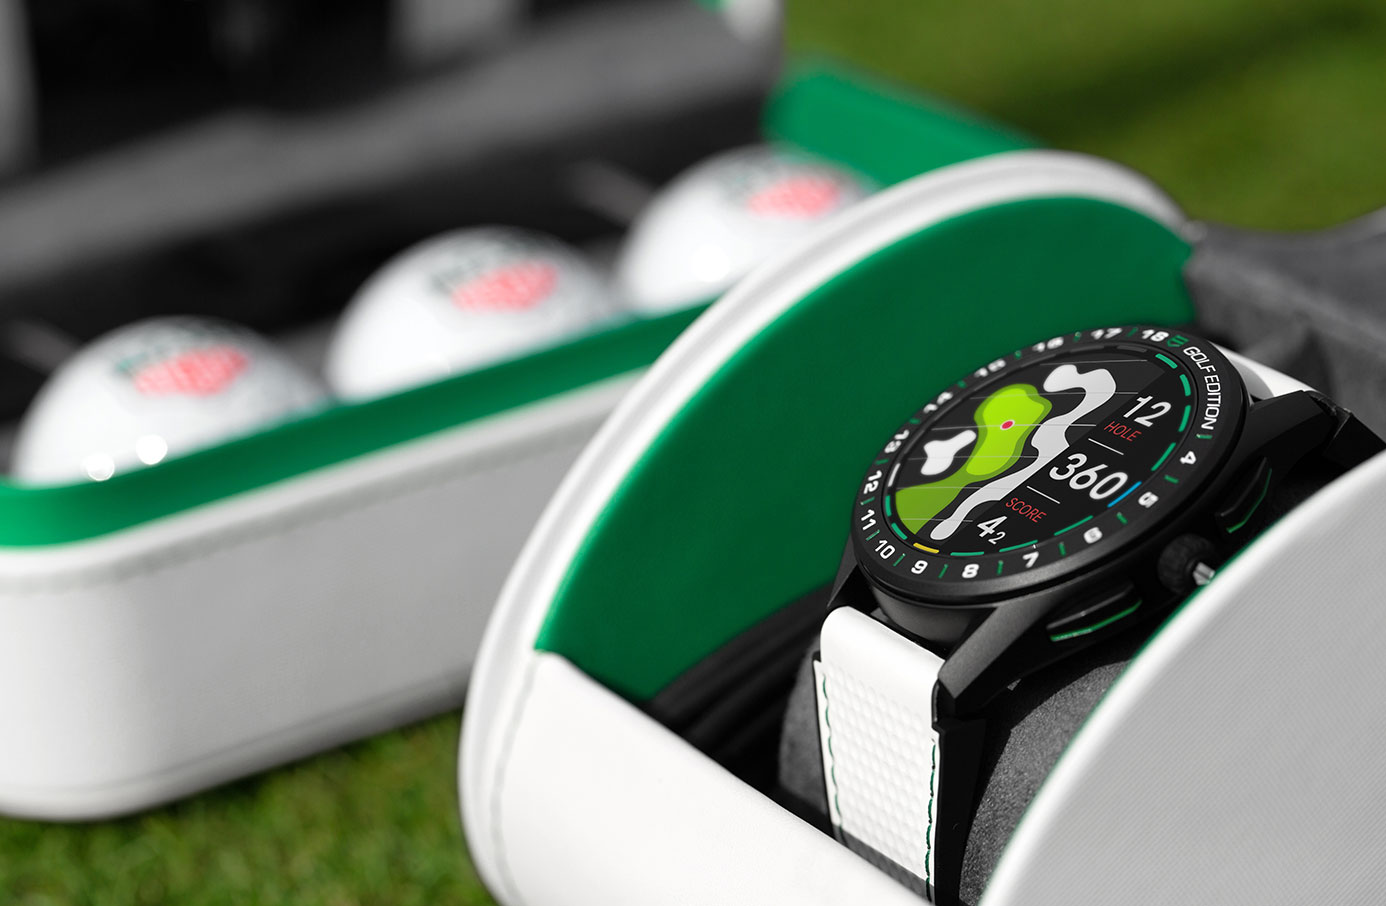 tag heuer golf edition connected